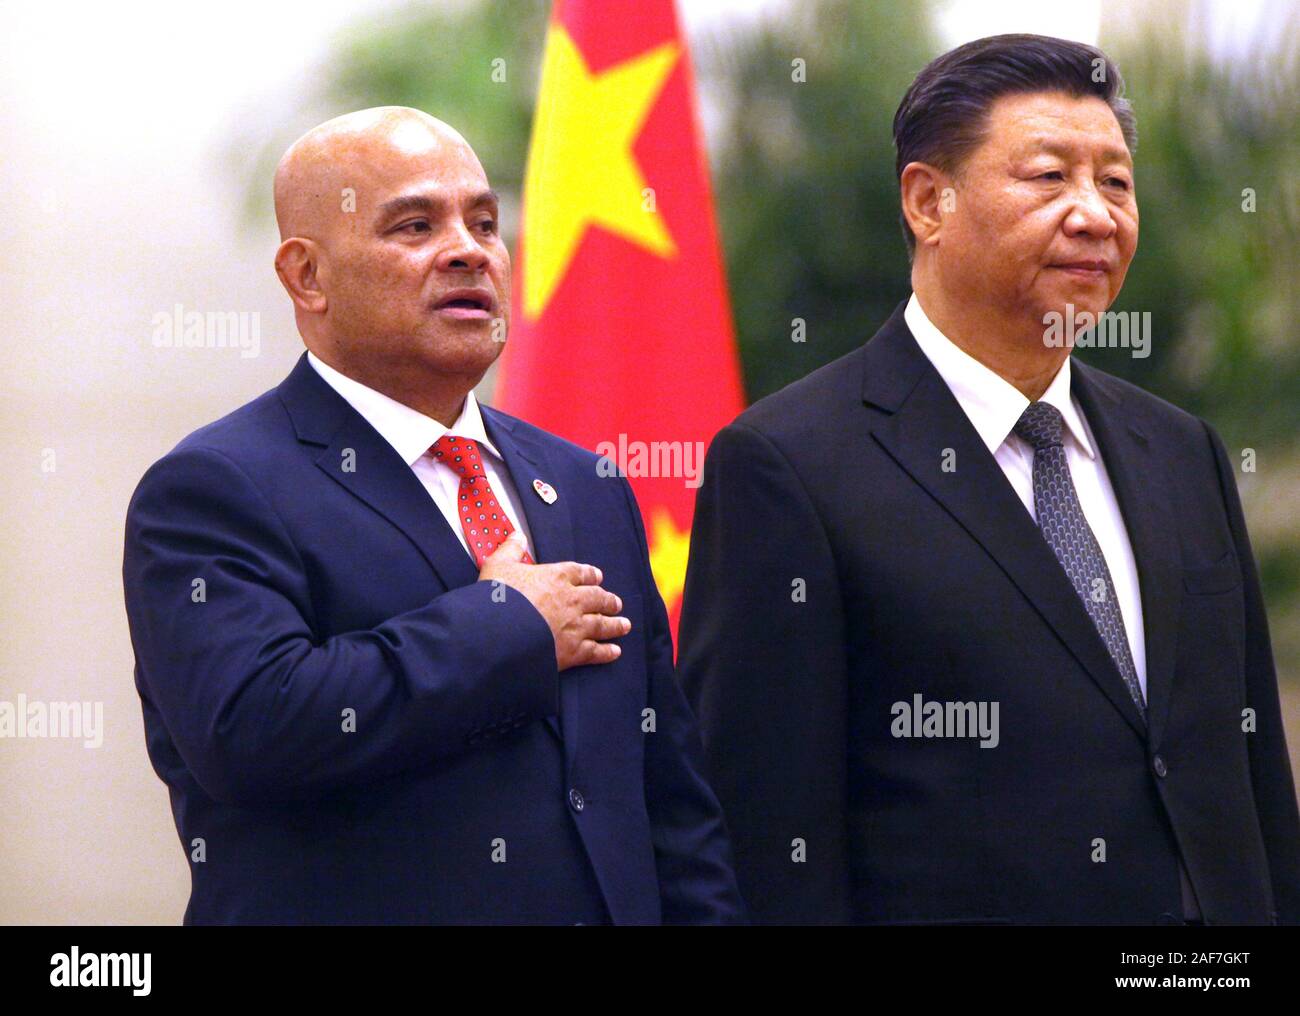 Beijing, China. 13th Dec, 2019. Micronesian President David Panuelo (L) and Chinese President Xi Jinping attend a welcoming ceremony at the Great Hall of the People in Beijing on Friday, December 13, 2019. Paneulo's visit to China highlights Beijing's growing interest in countering the U.S.'s geopolitical and military dominance in the region by using 'checkbook diplomacy' to gain inroads to the island nations. Photo by Stephen Shaver/UPI Credit: UPI/Alamy Live News Stock Photo